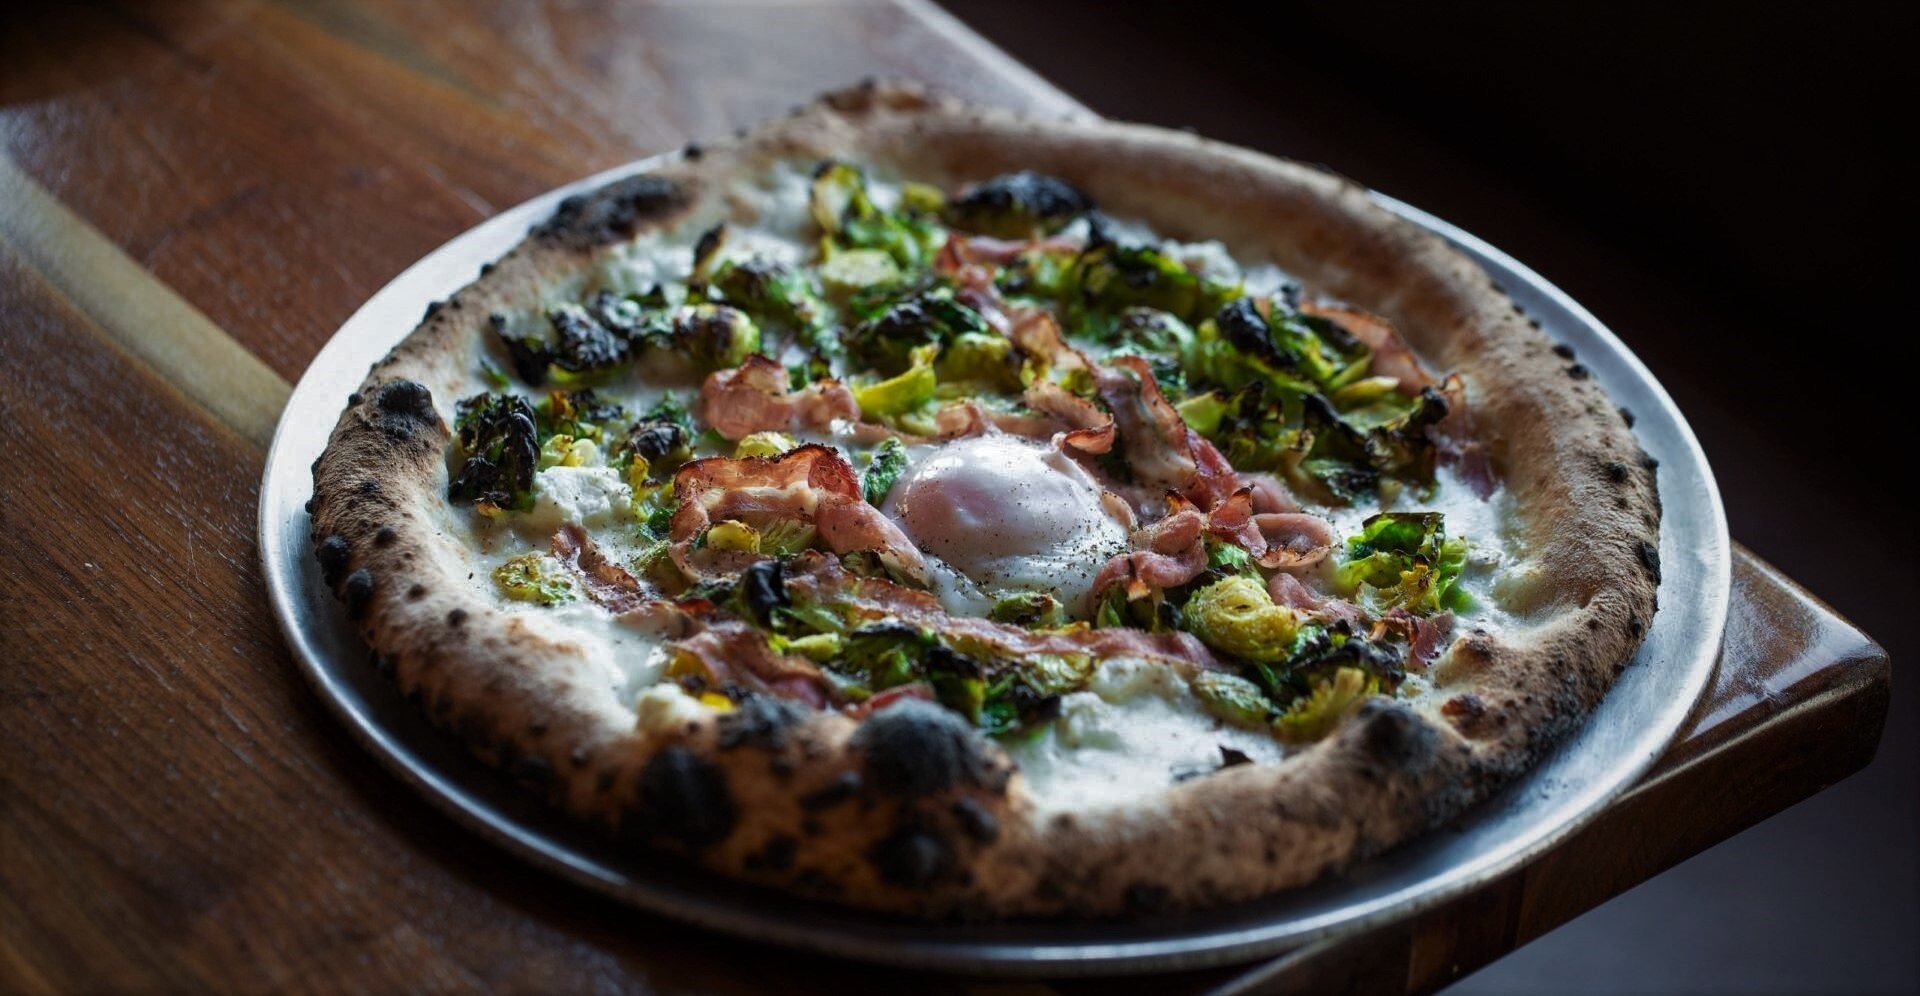 WOOD-FIRED NEAPOLITAN PIZZAS & MORE